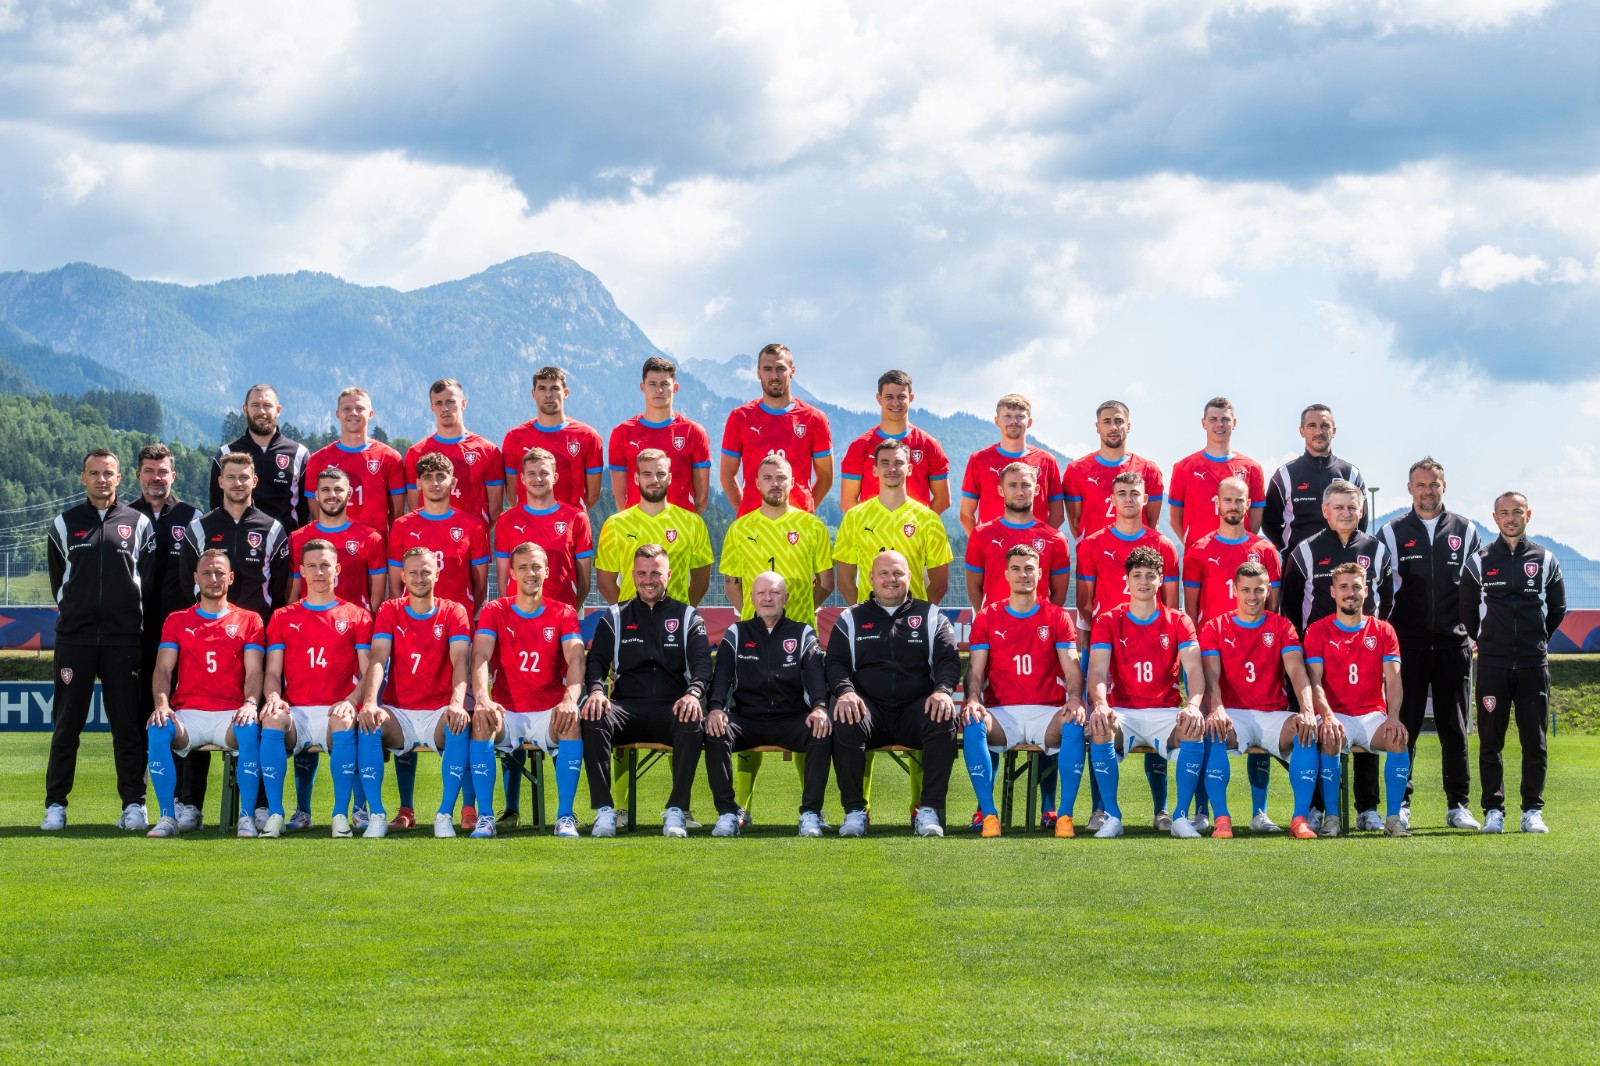 A group photo featuring the playing squad and the coaching staff of the Czech Republic men's national football team during a training camp in Schladming, Austria, June 6, 2024. /Football Association of the Czech Republic